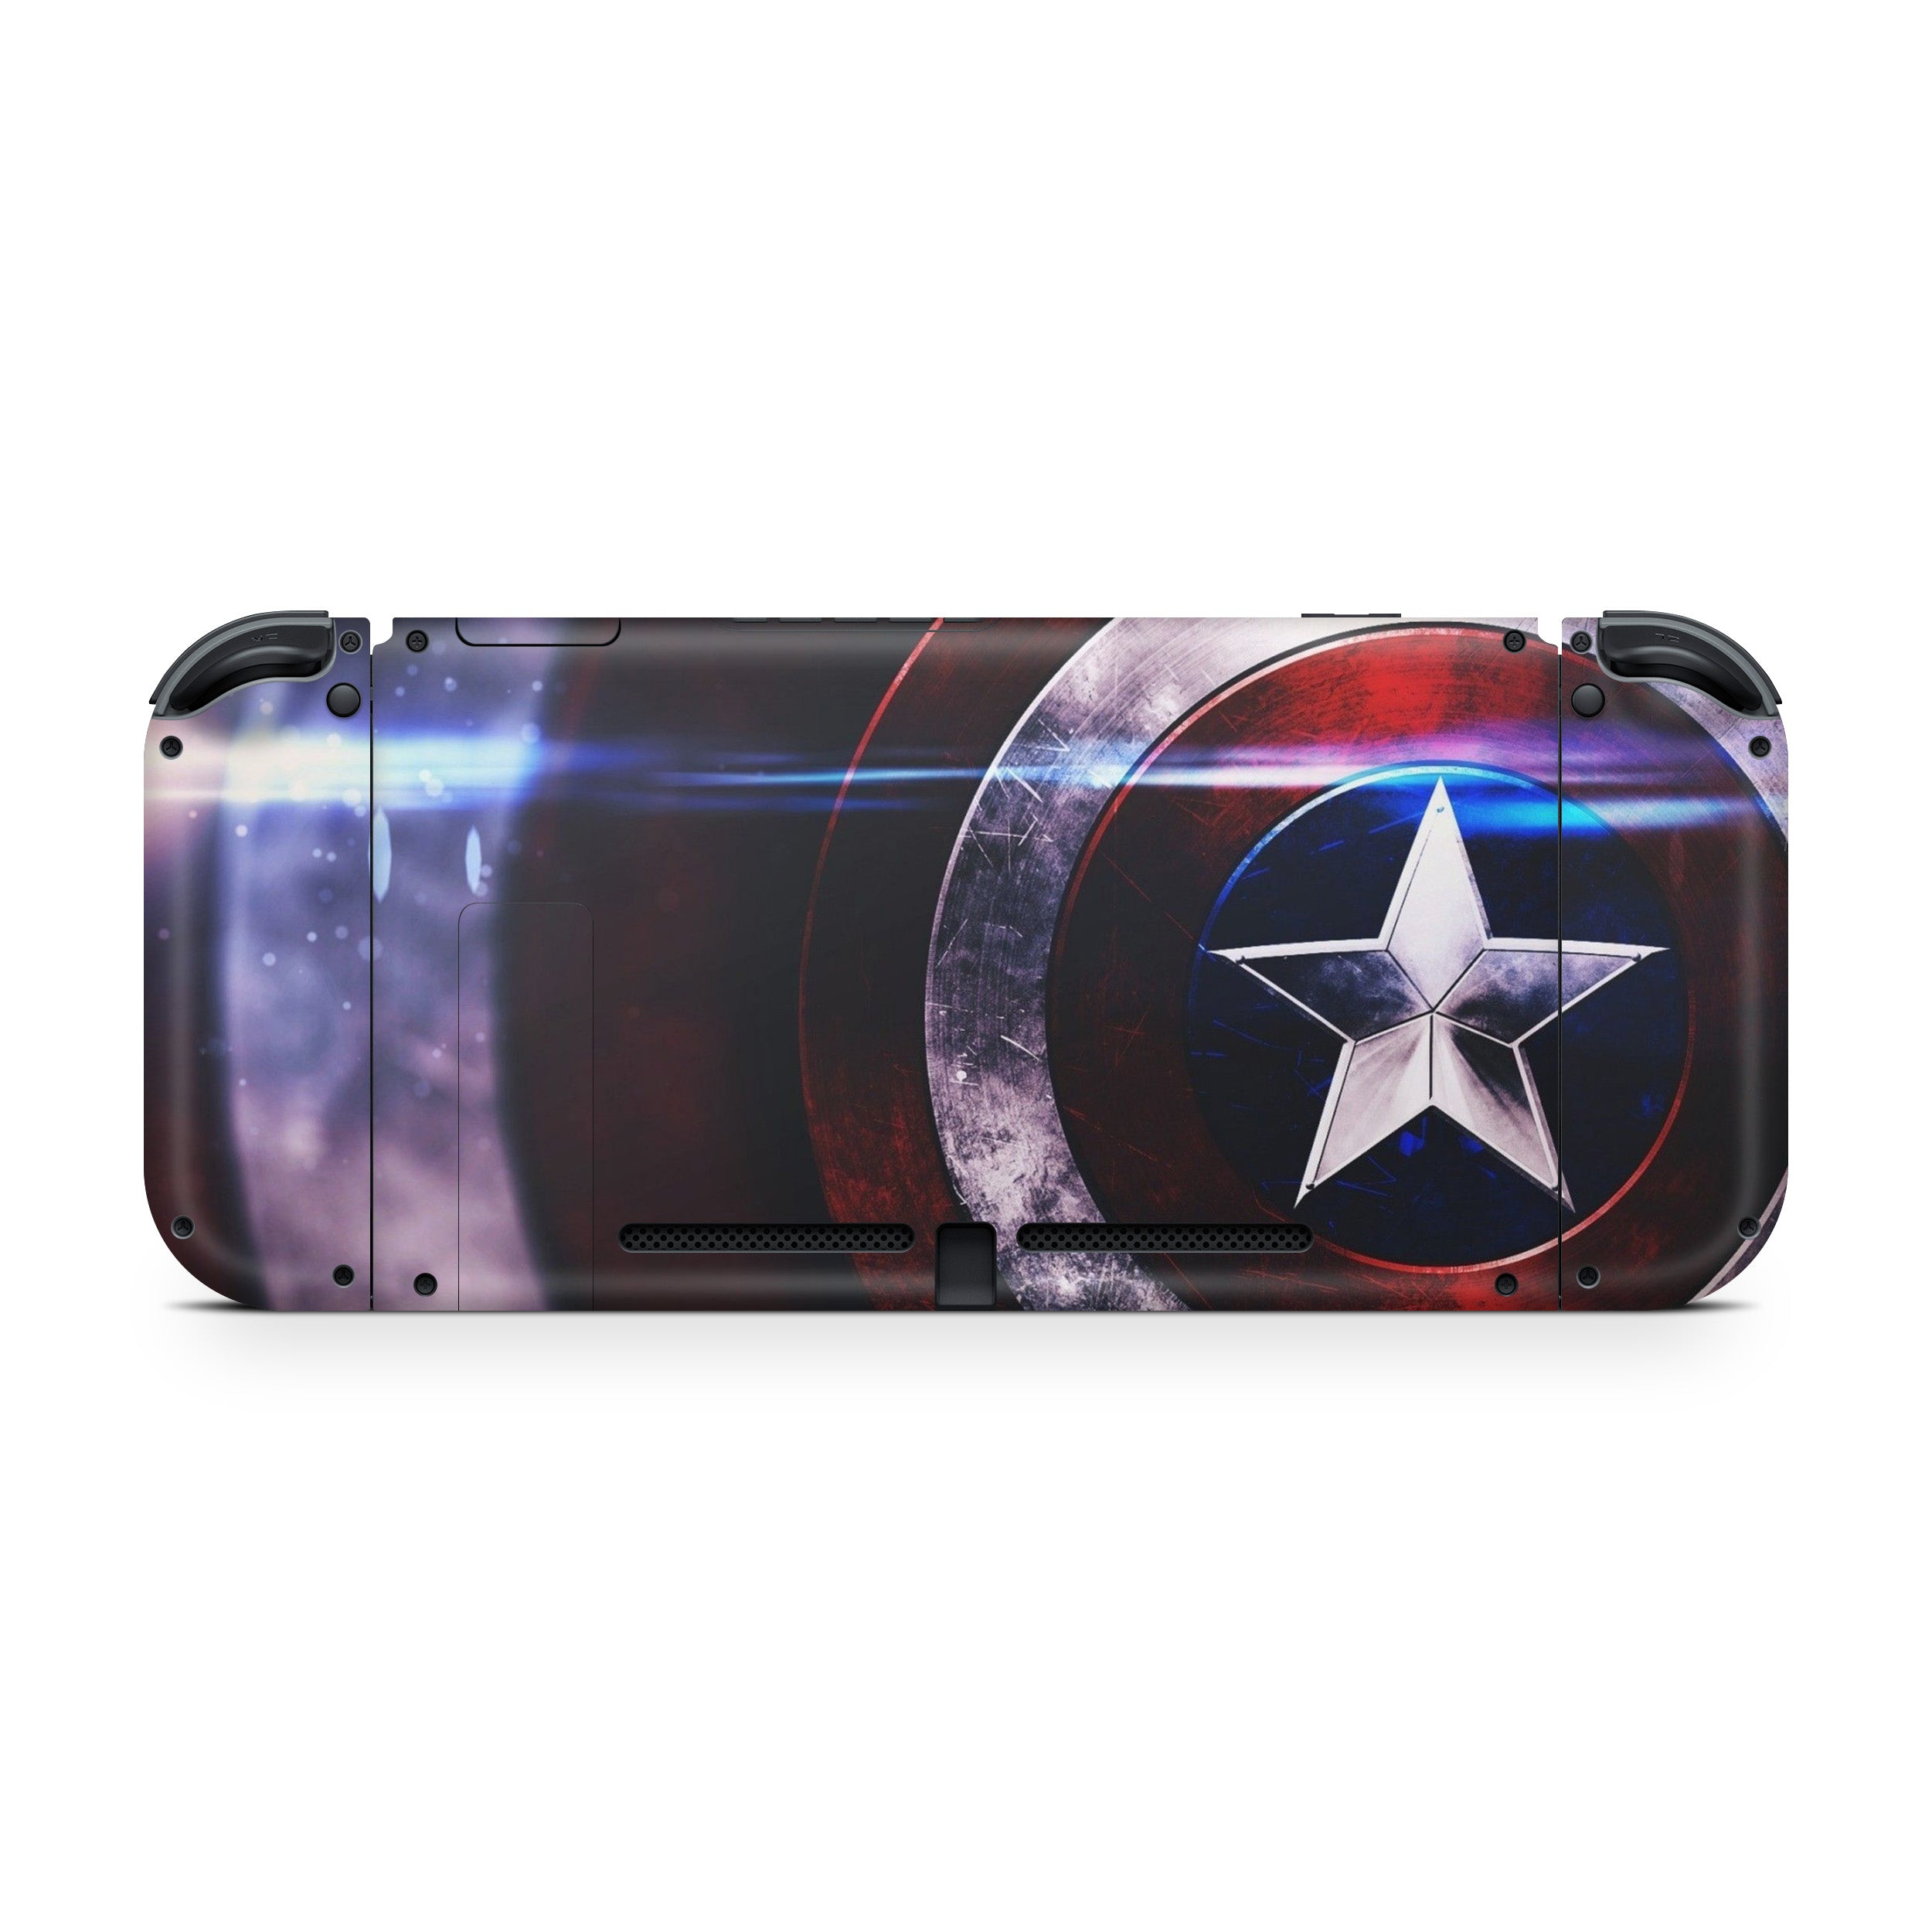 A video game skin featuring a Marvel Captain America design for the Nintendo Switch.